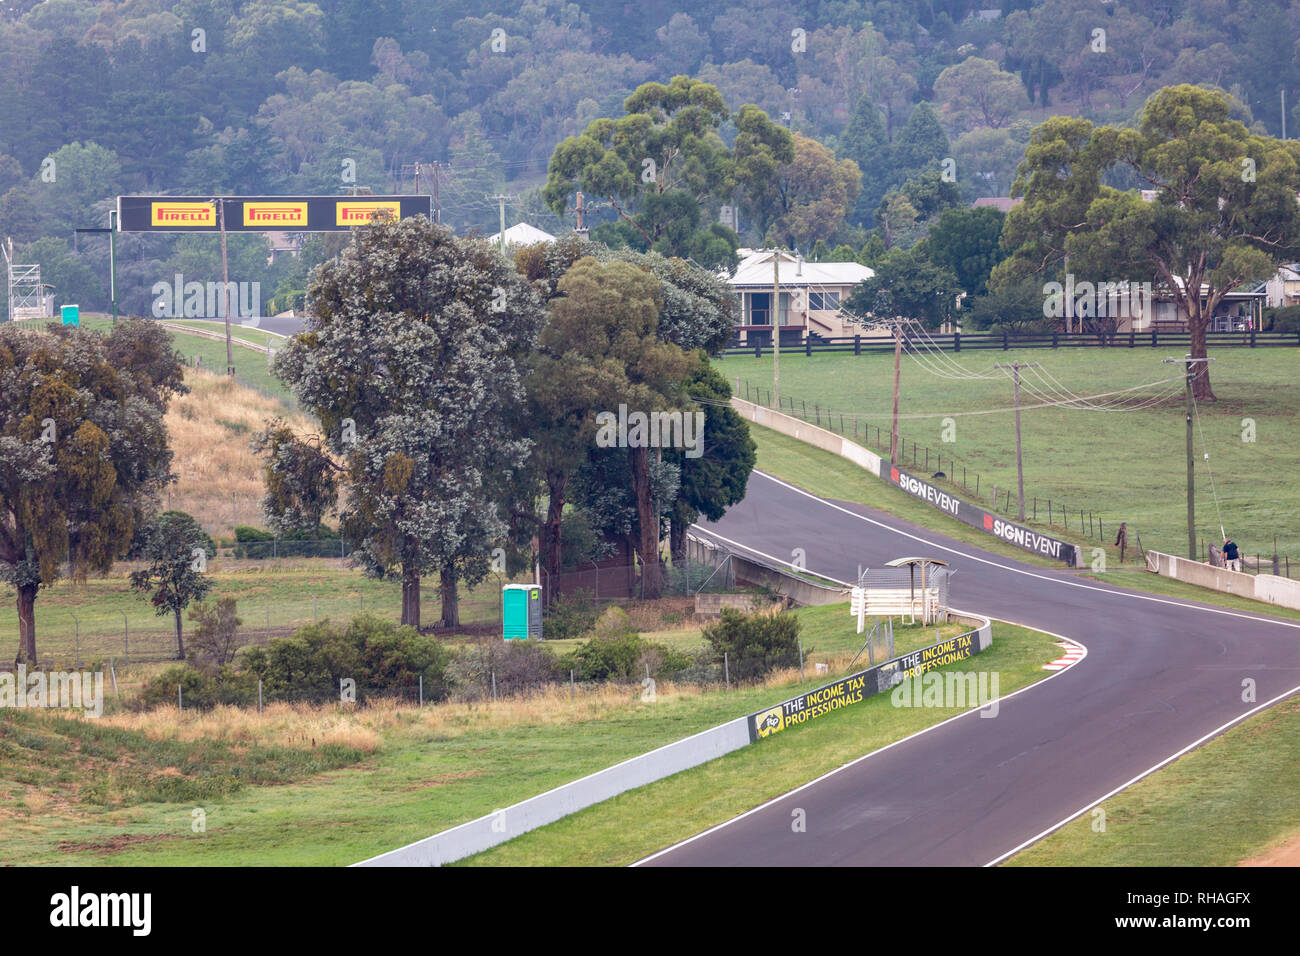 Mount Panorama Motor racing circuit in Bathurst, central tablelands, regional New South Wales,Australia Stock Photo